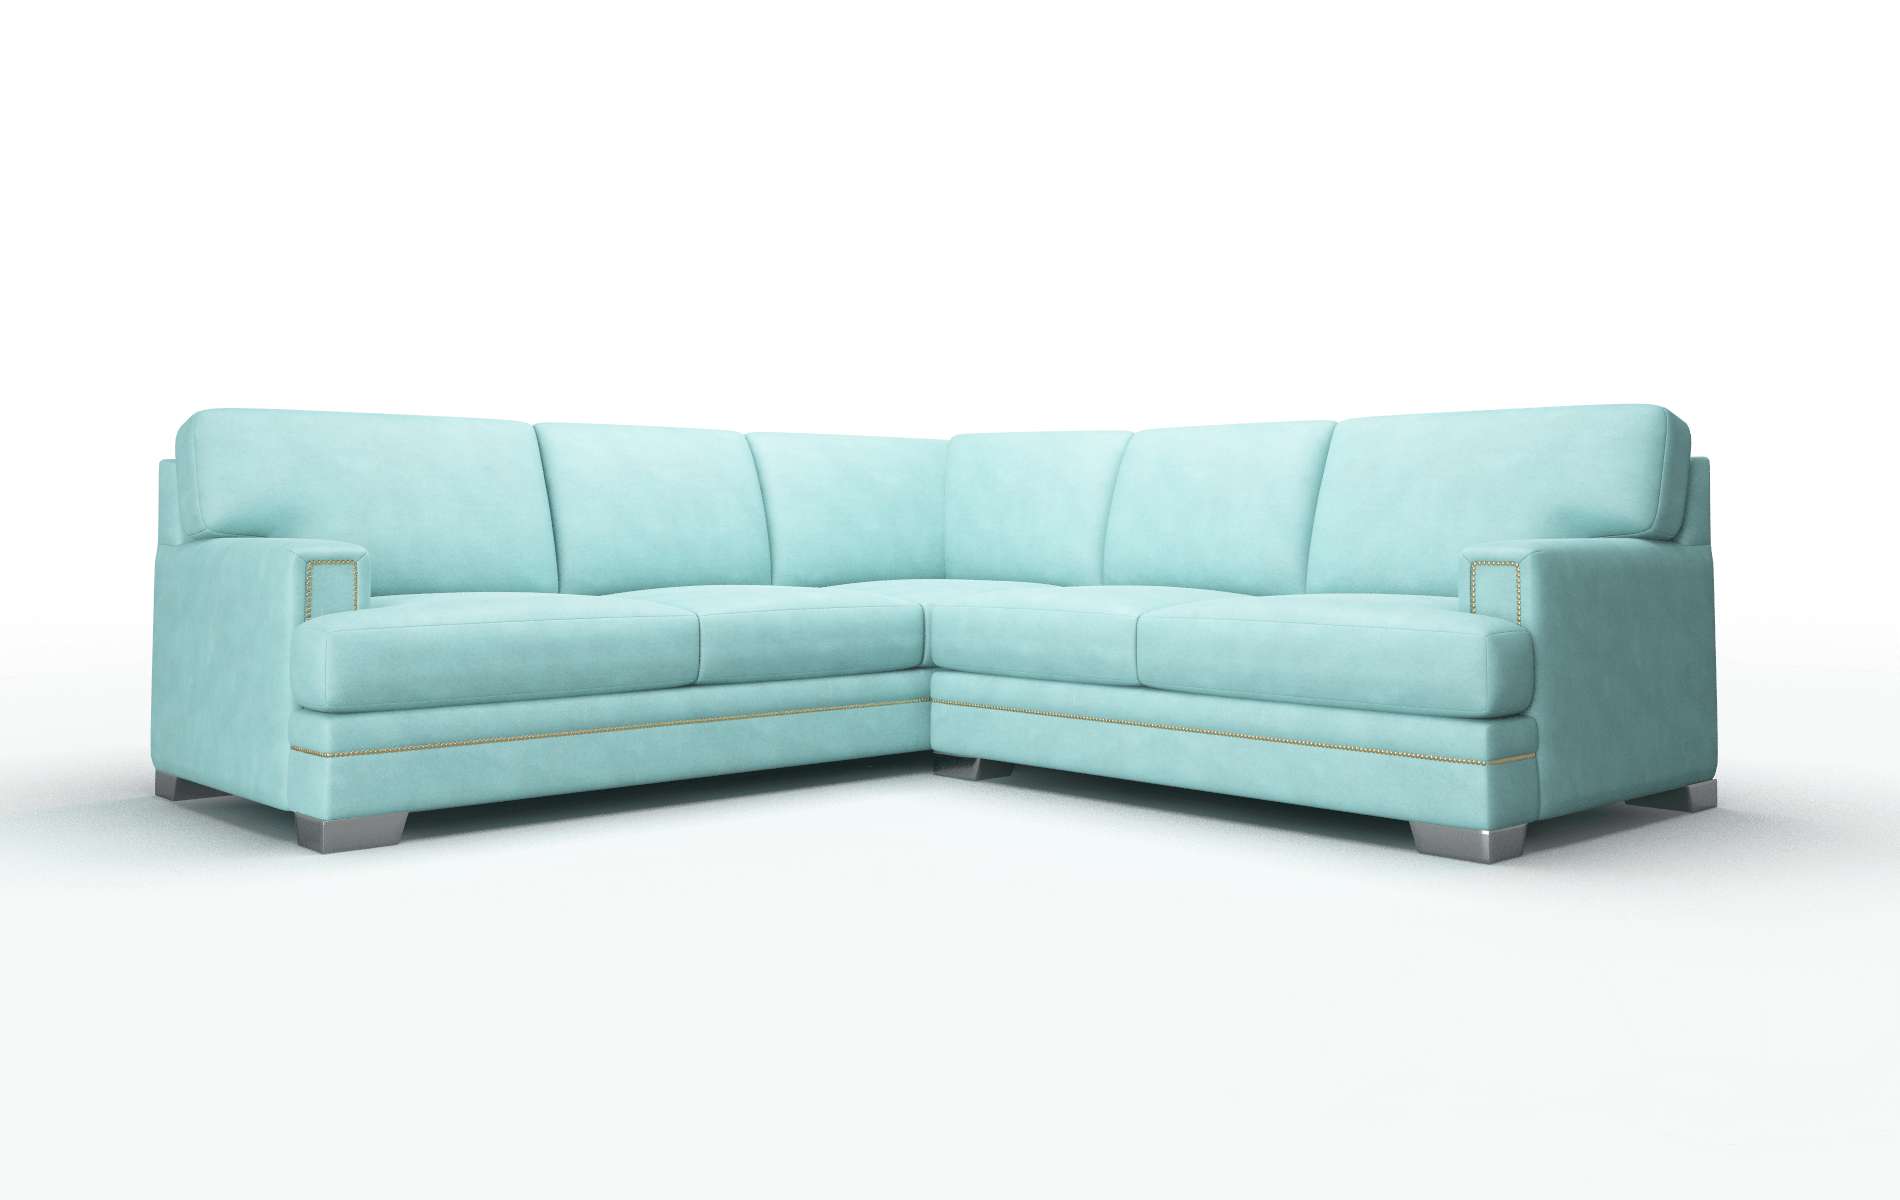 Barcelona Curious Turquoise Sectional metal legs